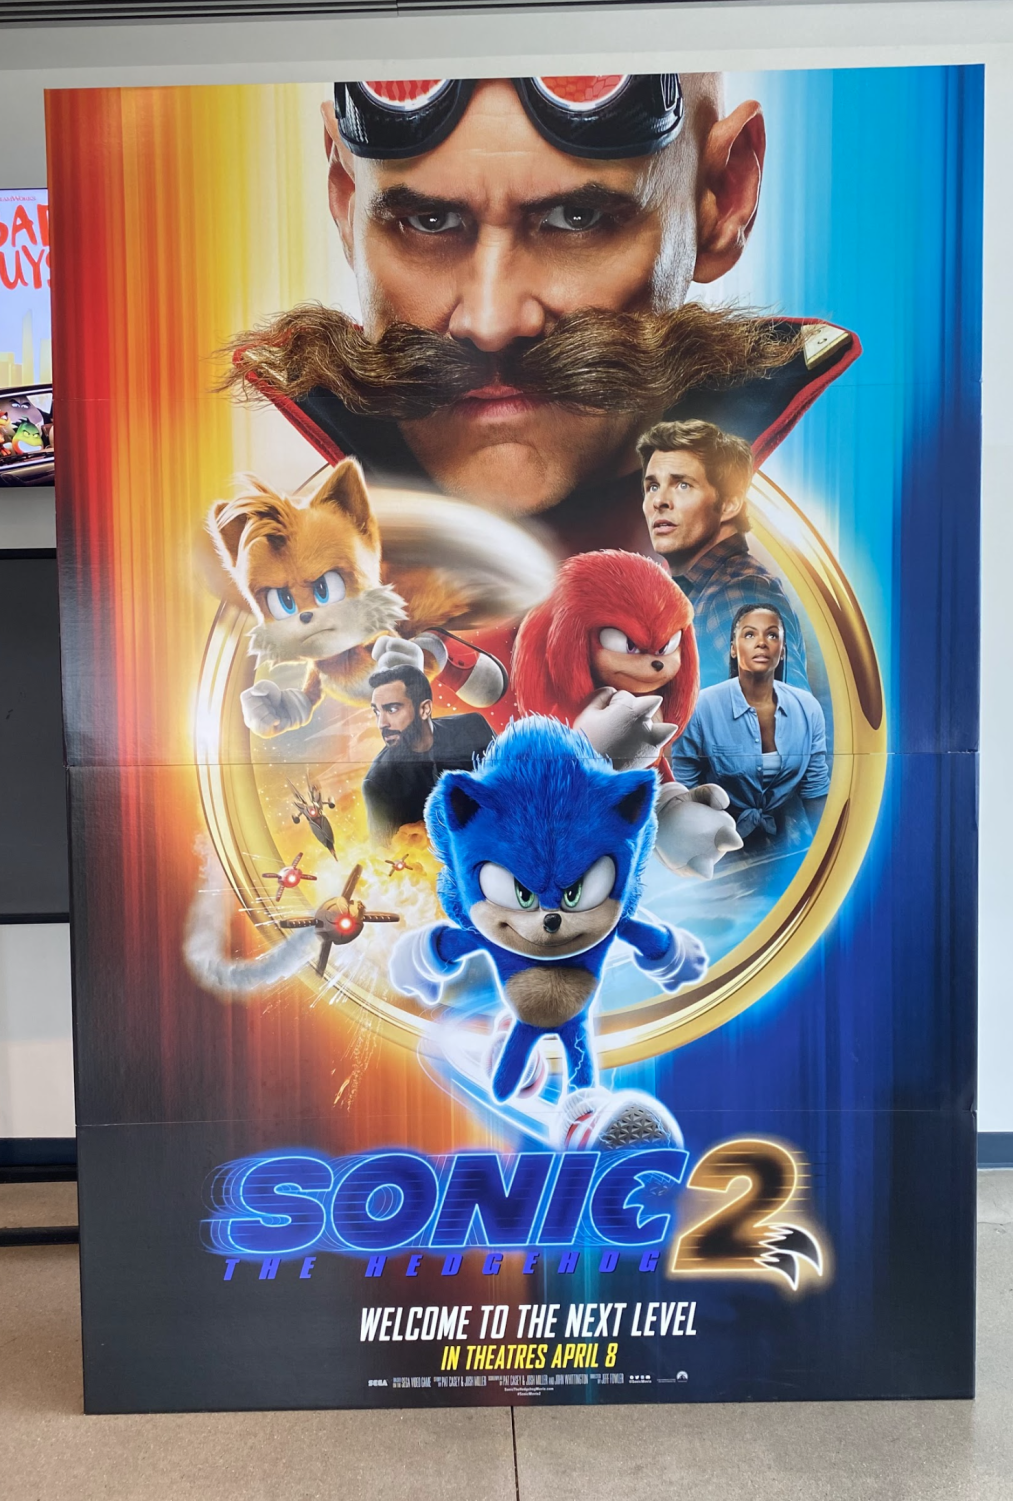 Watching 'Sonic the Hedgehog 2' in a Movie Theater Near Me (2022